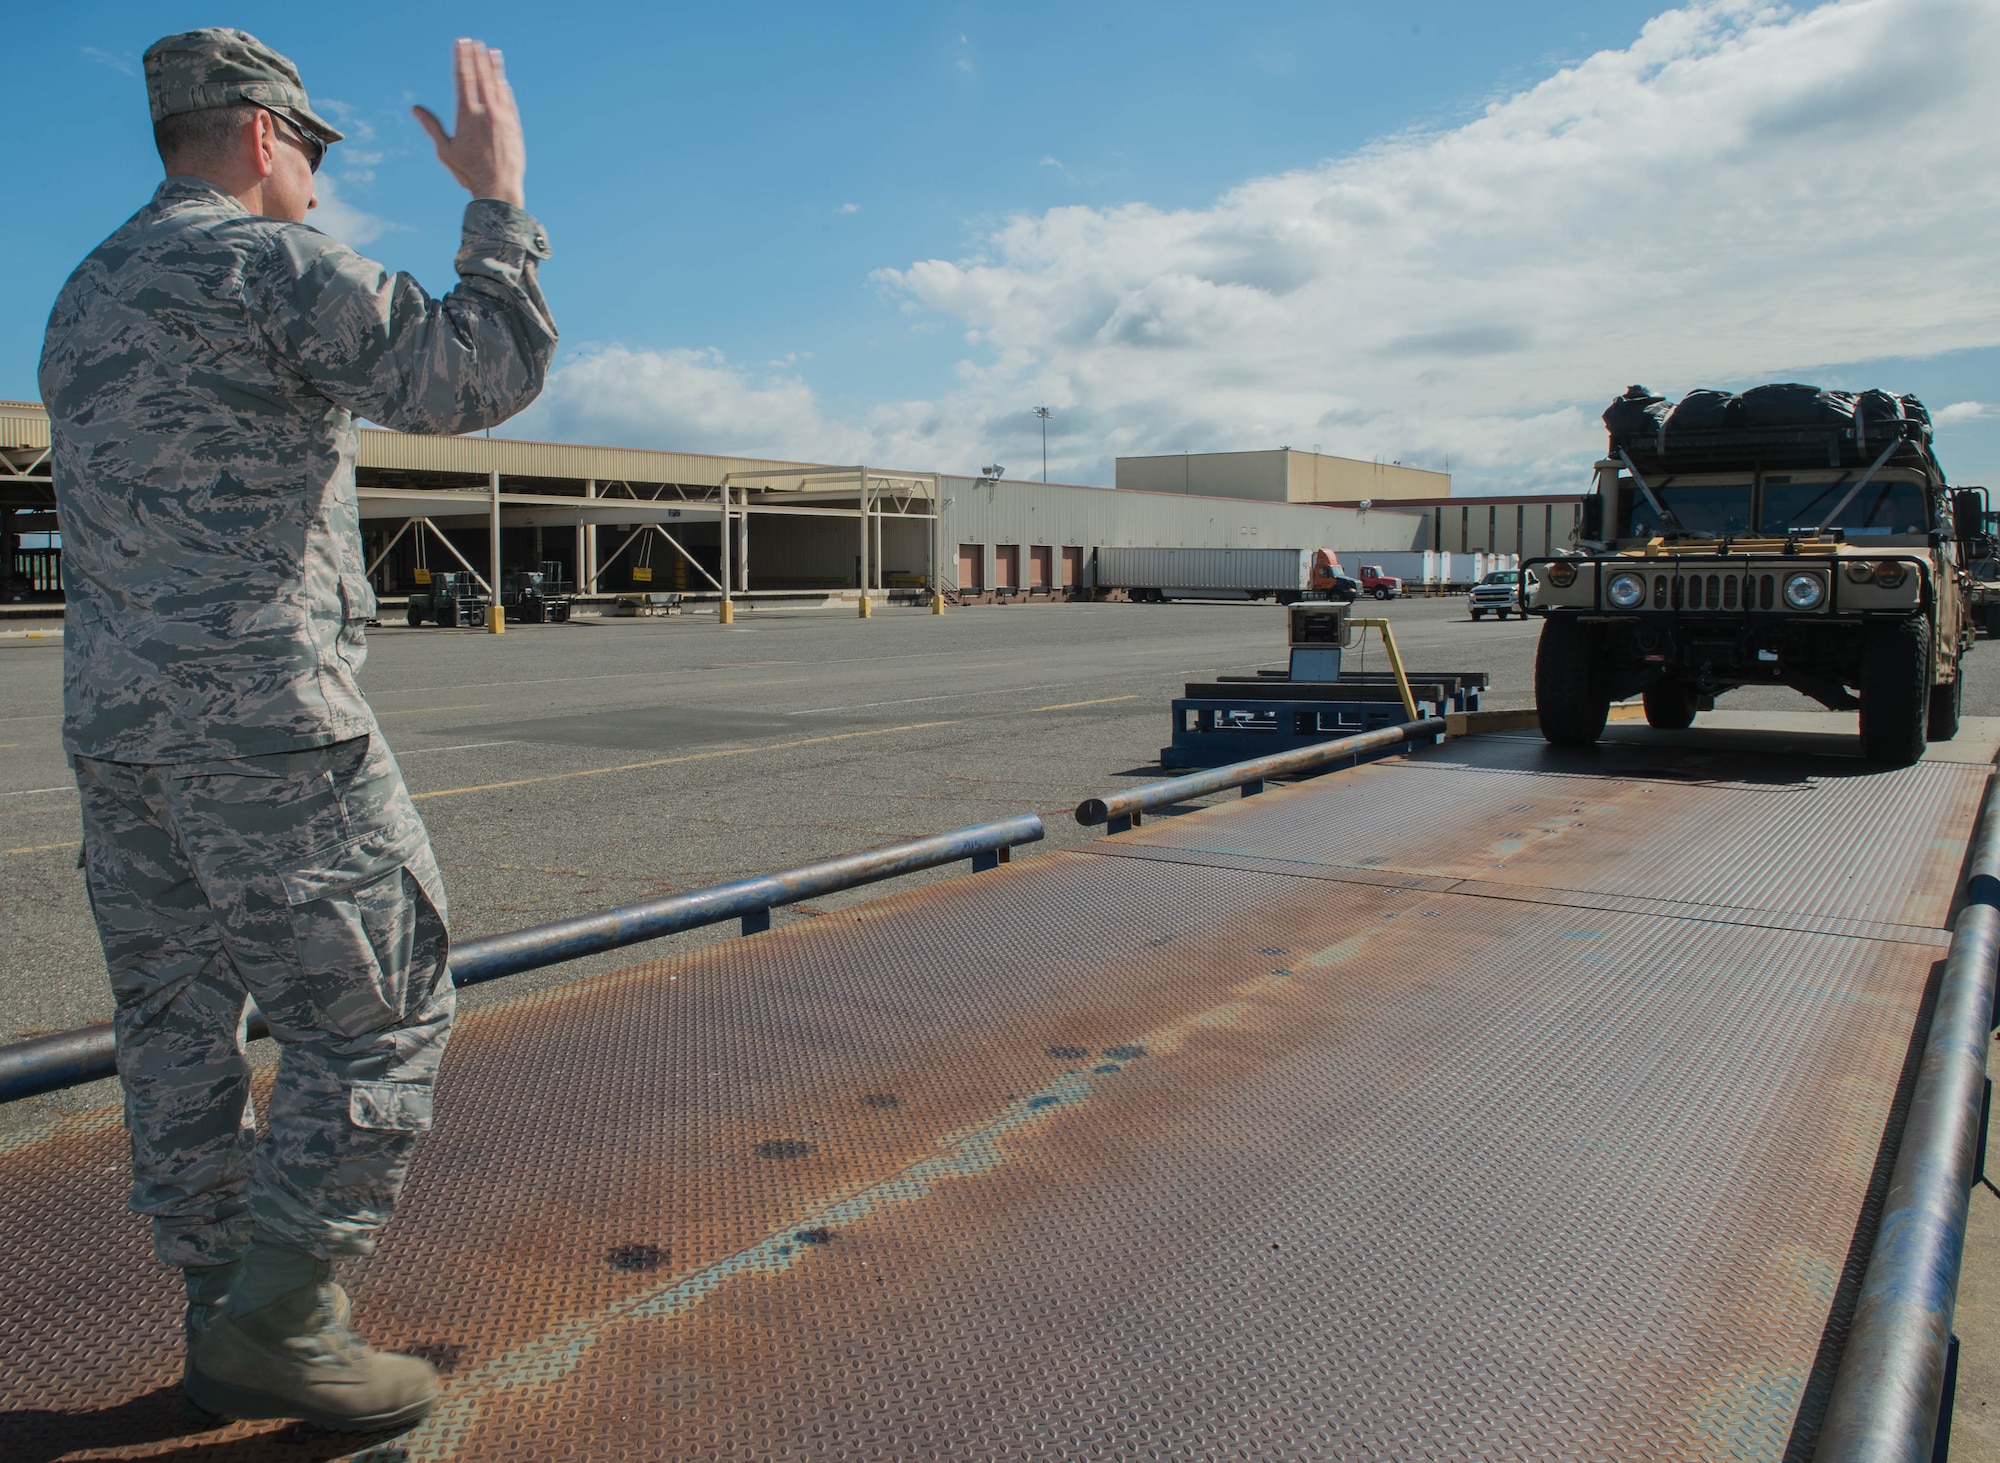 Col. Rhett Champagne, 821st Contingency Response Group commander, directs a Humvee onto a scale to check the weight and center balance before being loaded on a C-17 Globemaster lll aircraft before departing Travis Air Force Base, Calif., to support earthquake response efforts in Ecuador, April 21, 2016. The 621st Contingency Response Wing is providing an assessment team that includes subject matter liaisons in the realms of aerial port operations, cargo movement, material handling equipment, and communications. The 621st CRW maintains a ready corps of light, lean and agile mobility support forces able to respond as directed in order to meet combatant command requirements for humanitarian aid operations. (U.S. Air Force photo by Staff Sgt. Robert Hicks/Released)  